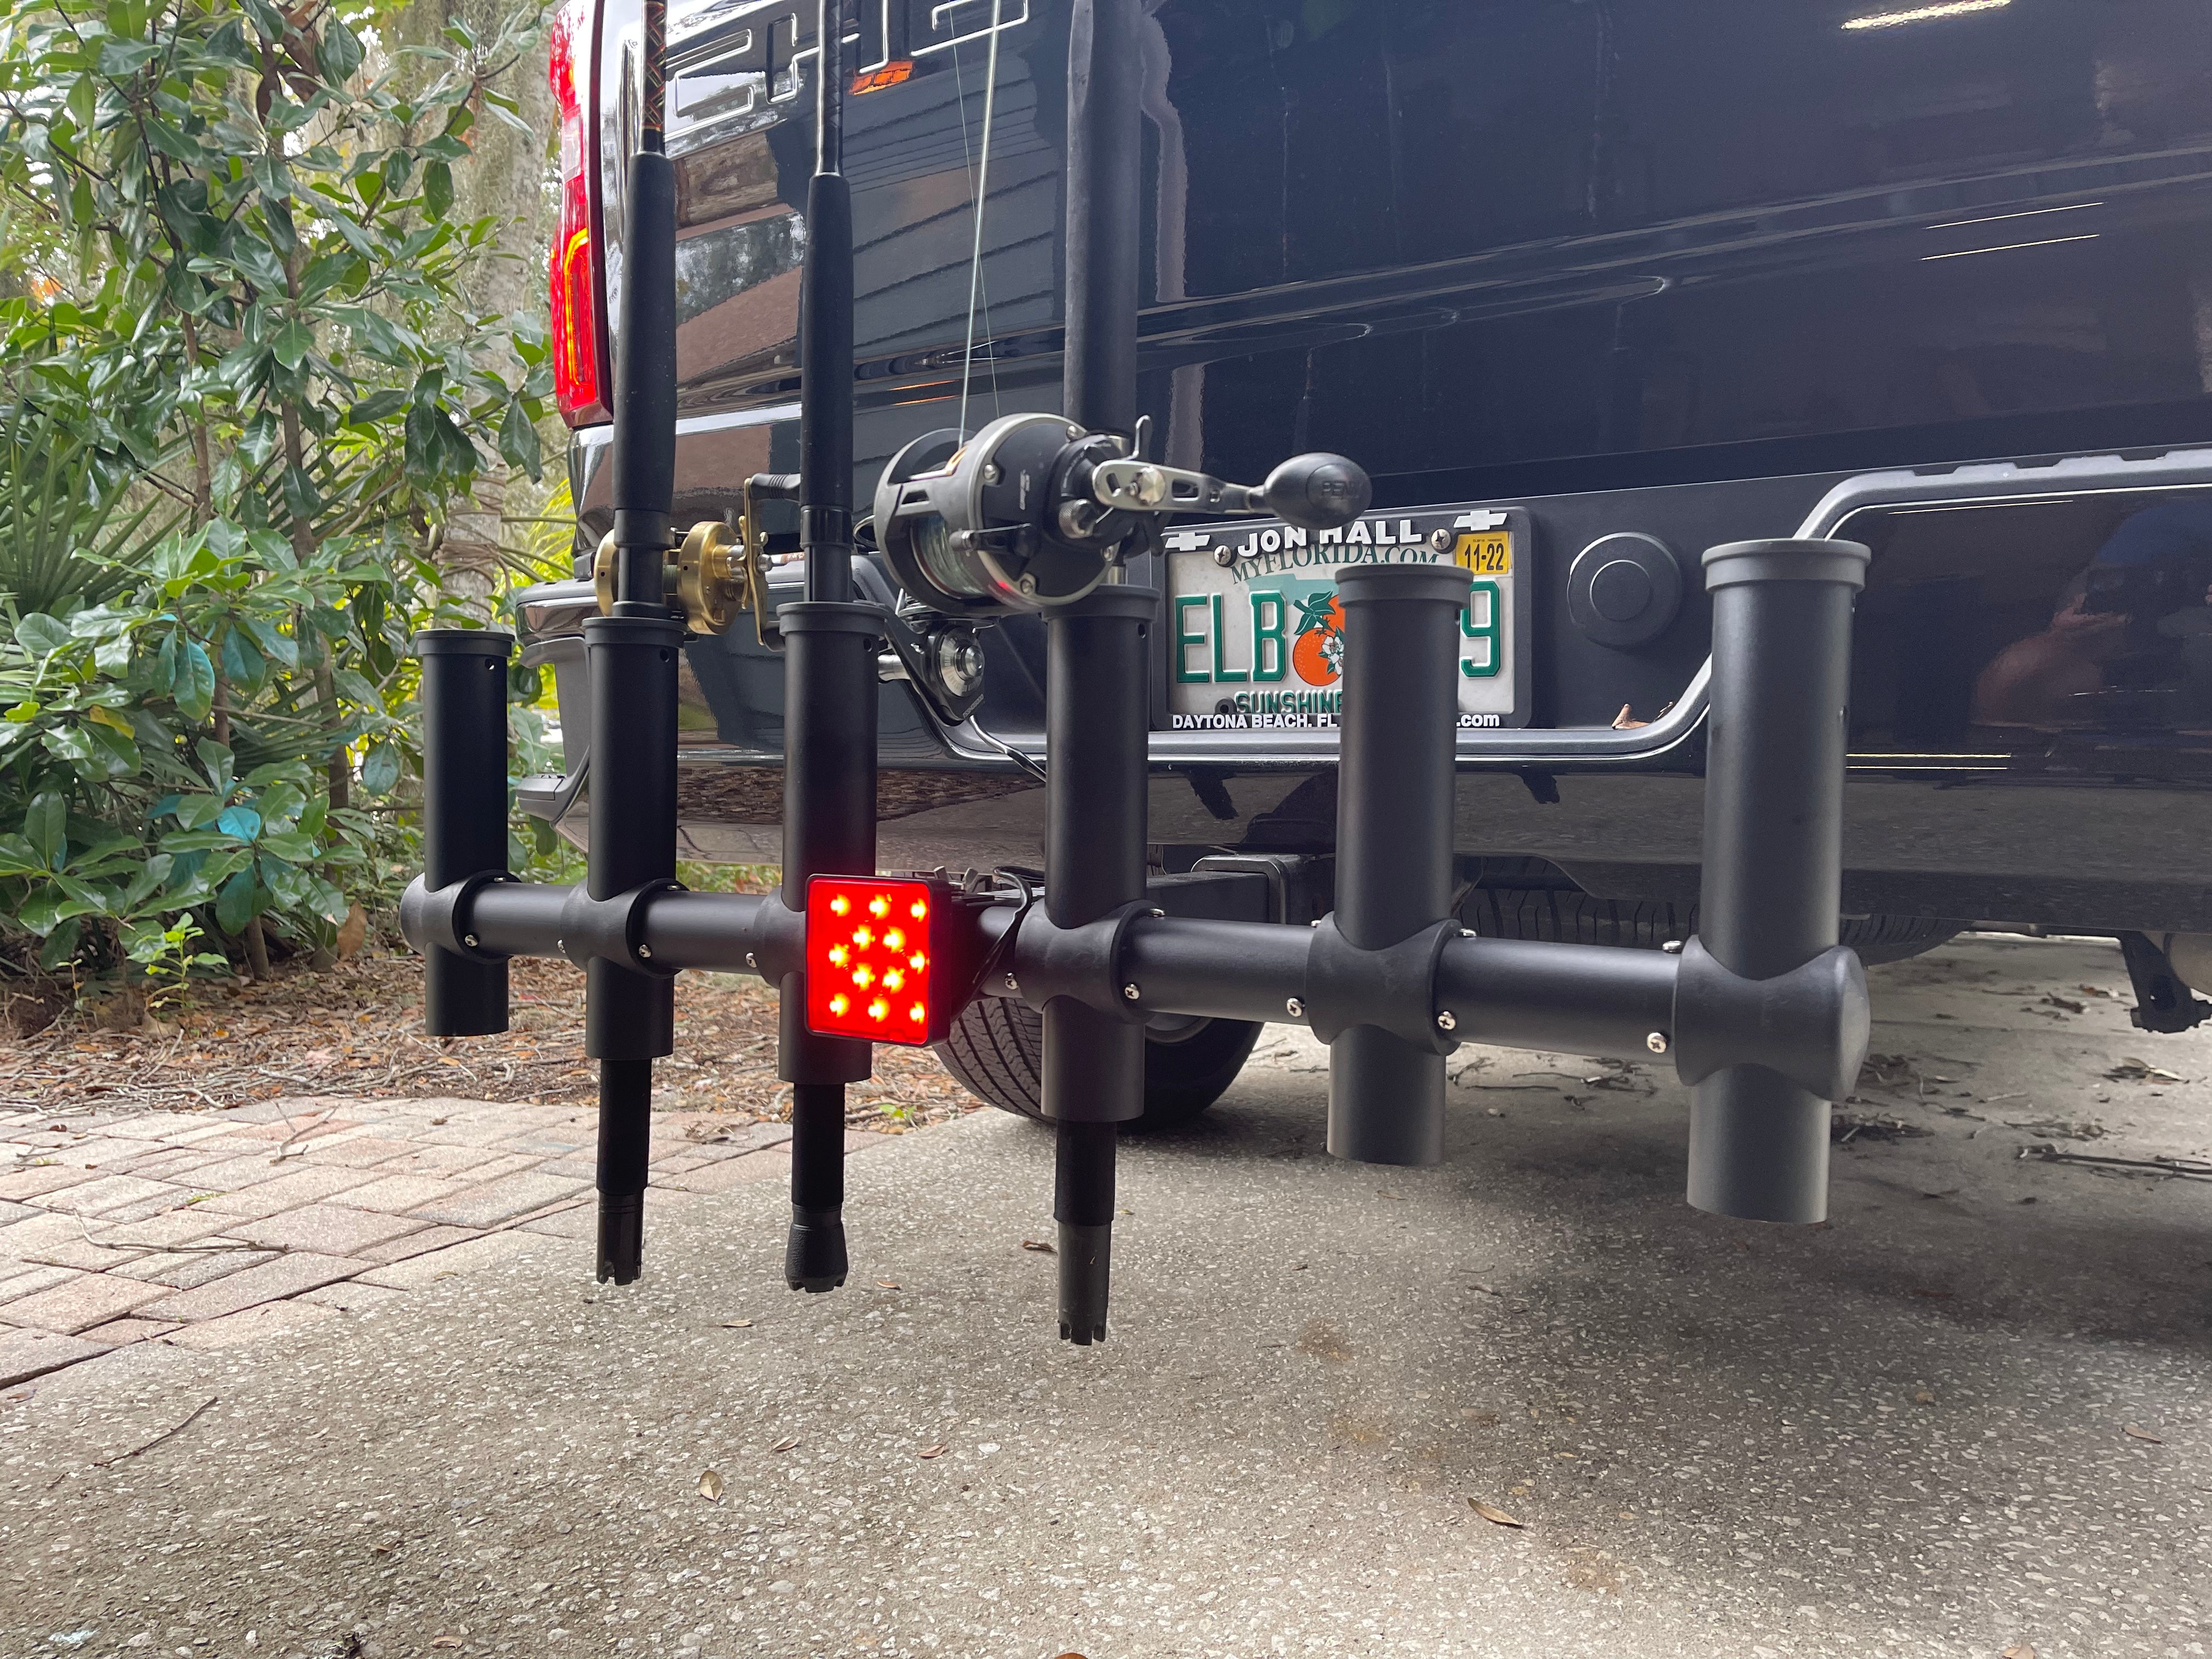 Upgrade your fishing pole holder for trucks with FISHITCH's brake light attachment.